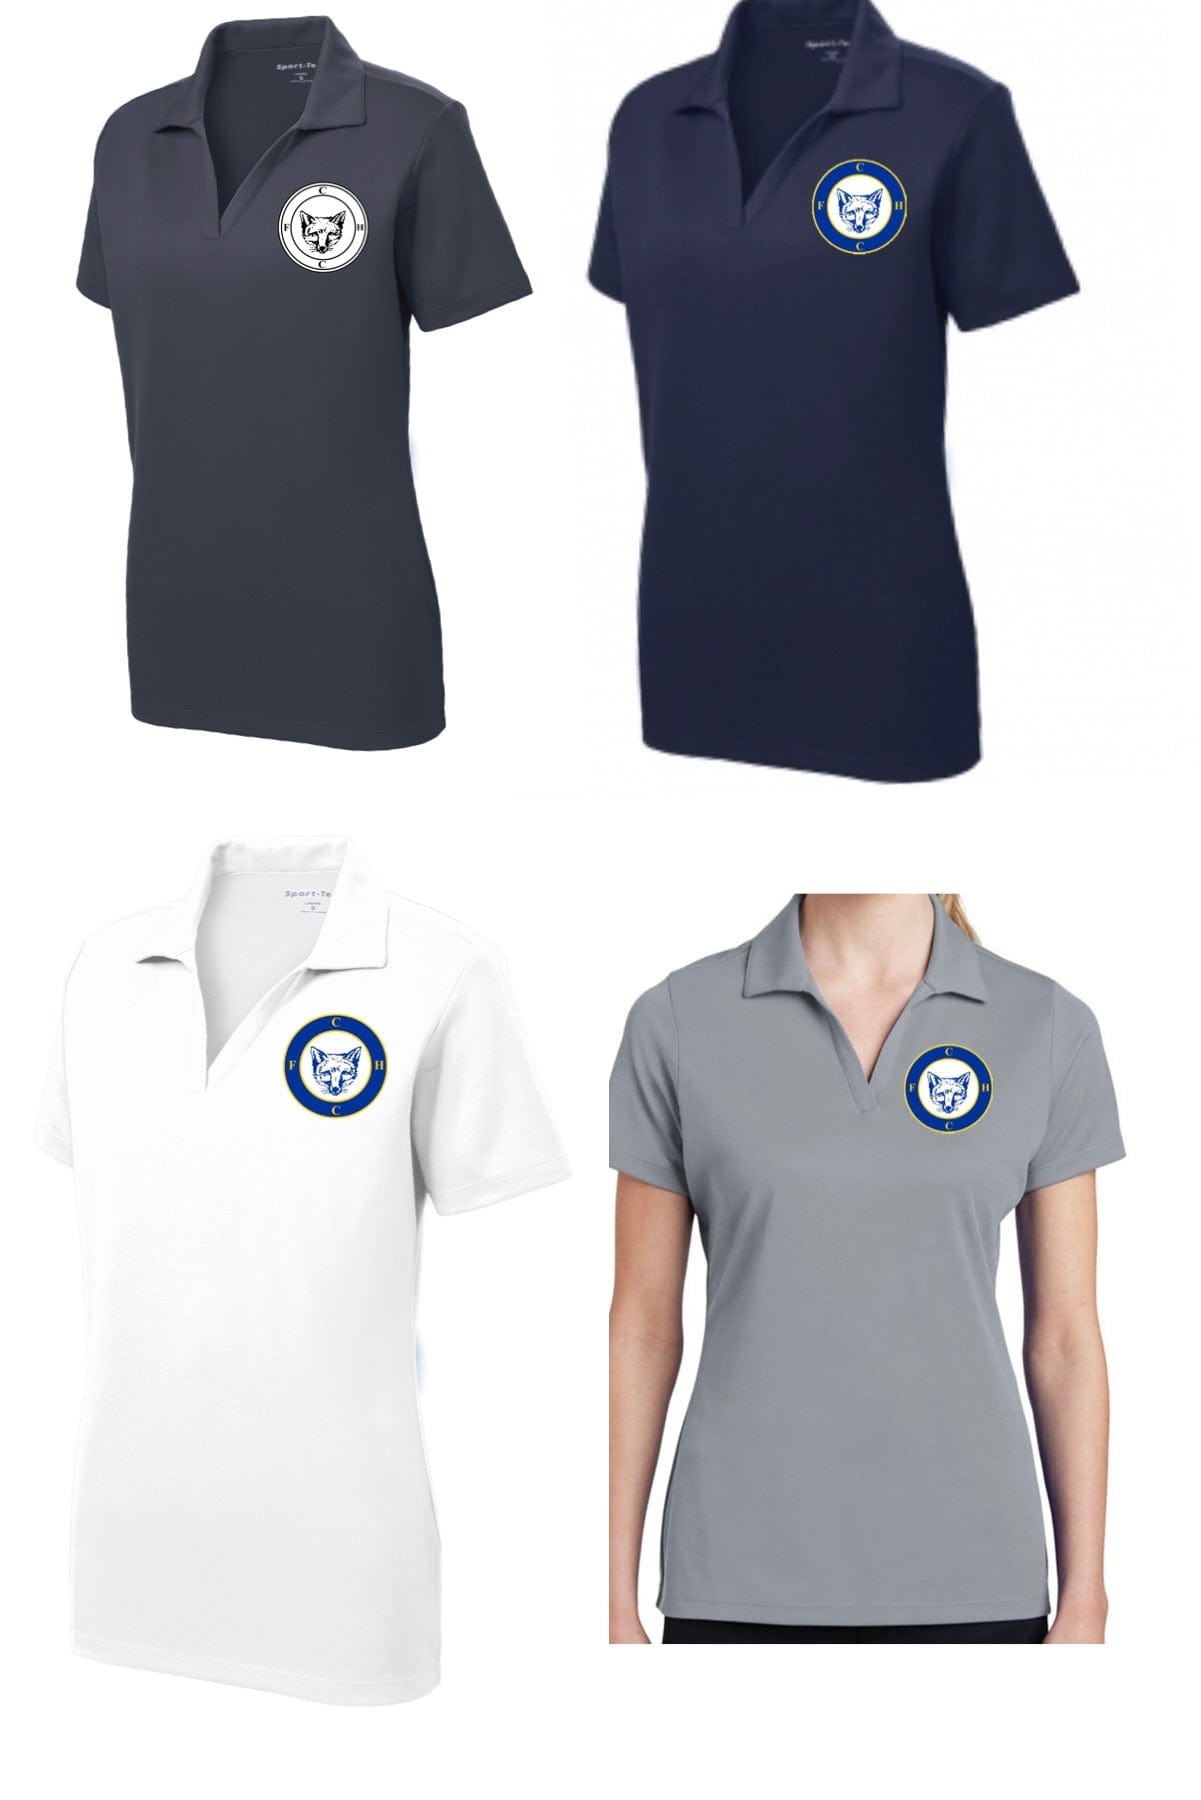 Equestrian Team Apparel FCHC Youth Polo Shirt equestrian team apparel online tack store mobile tack store custom farm apparel custom show stable clothing equestrian lifestyle horse show clothing riding clothes horses equestrian tack store